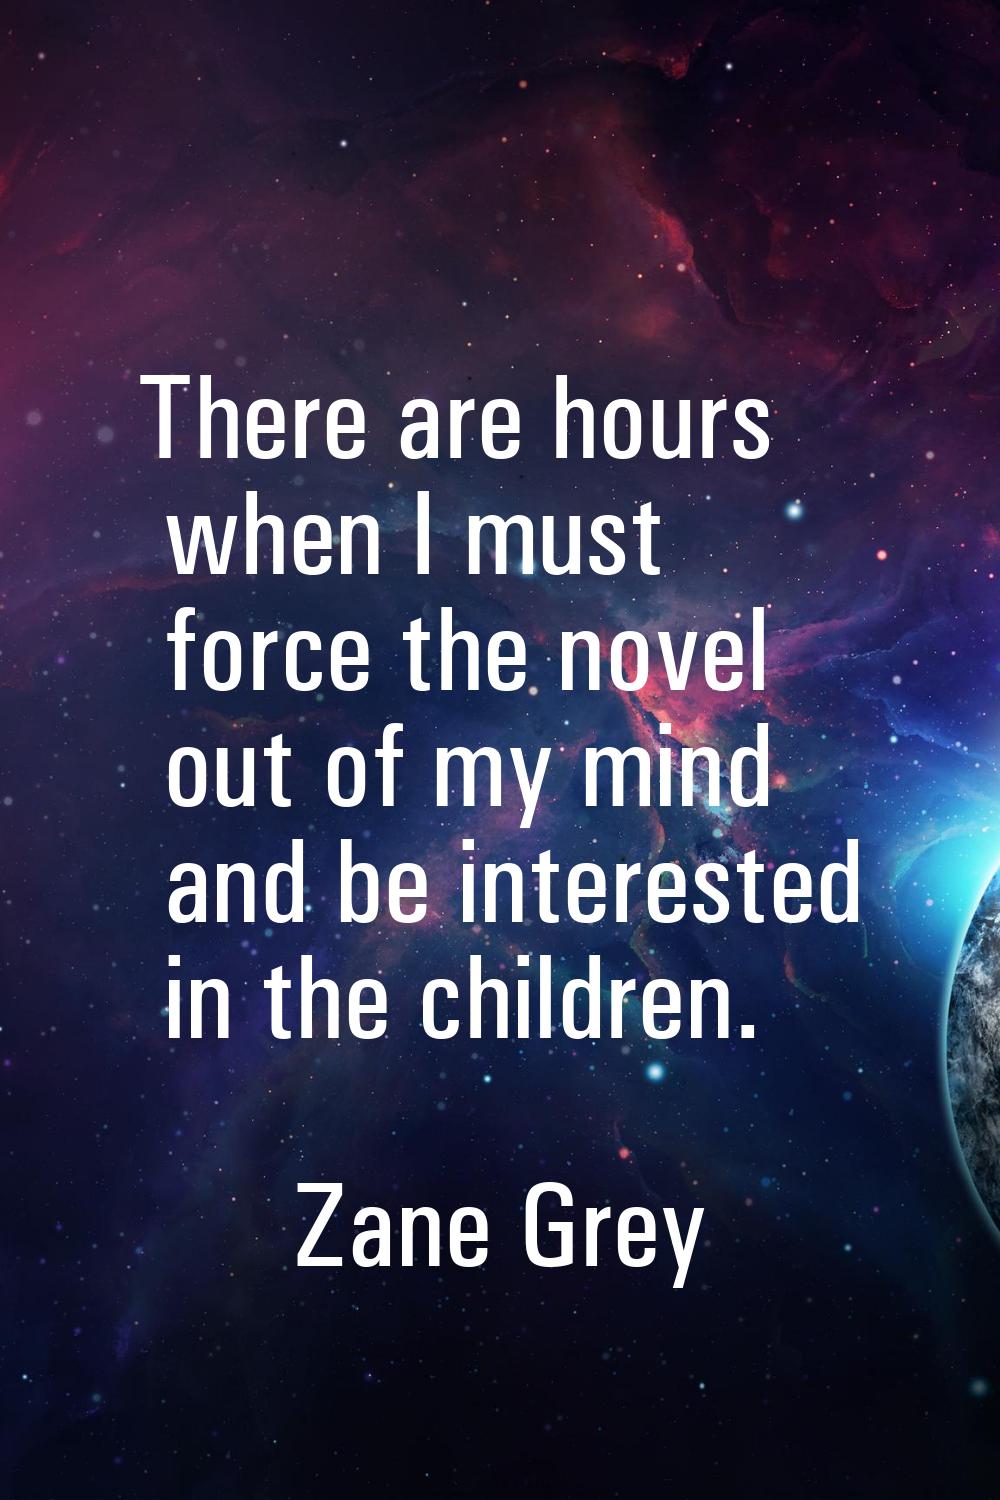 There are hours when I must force the novel out of my mind and be interested in the children.